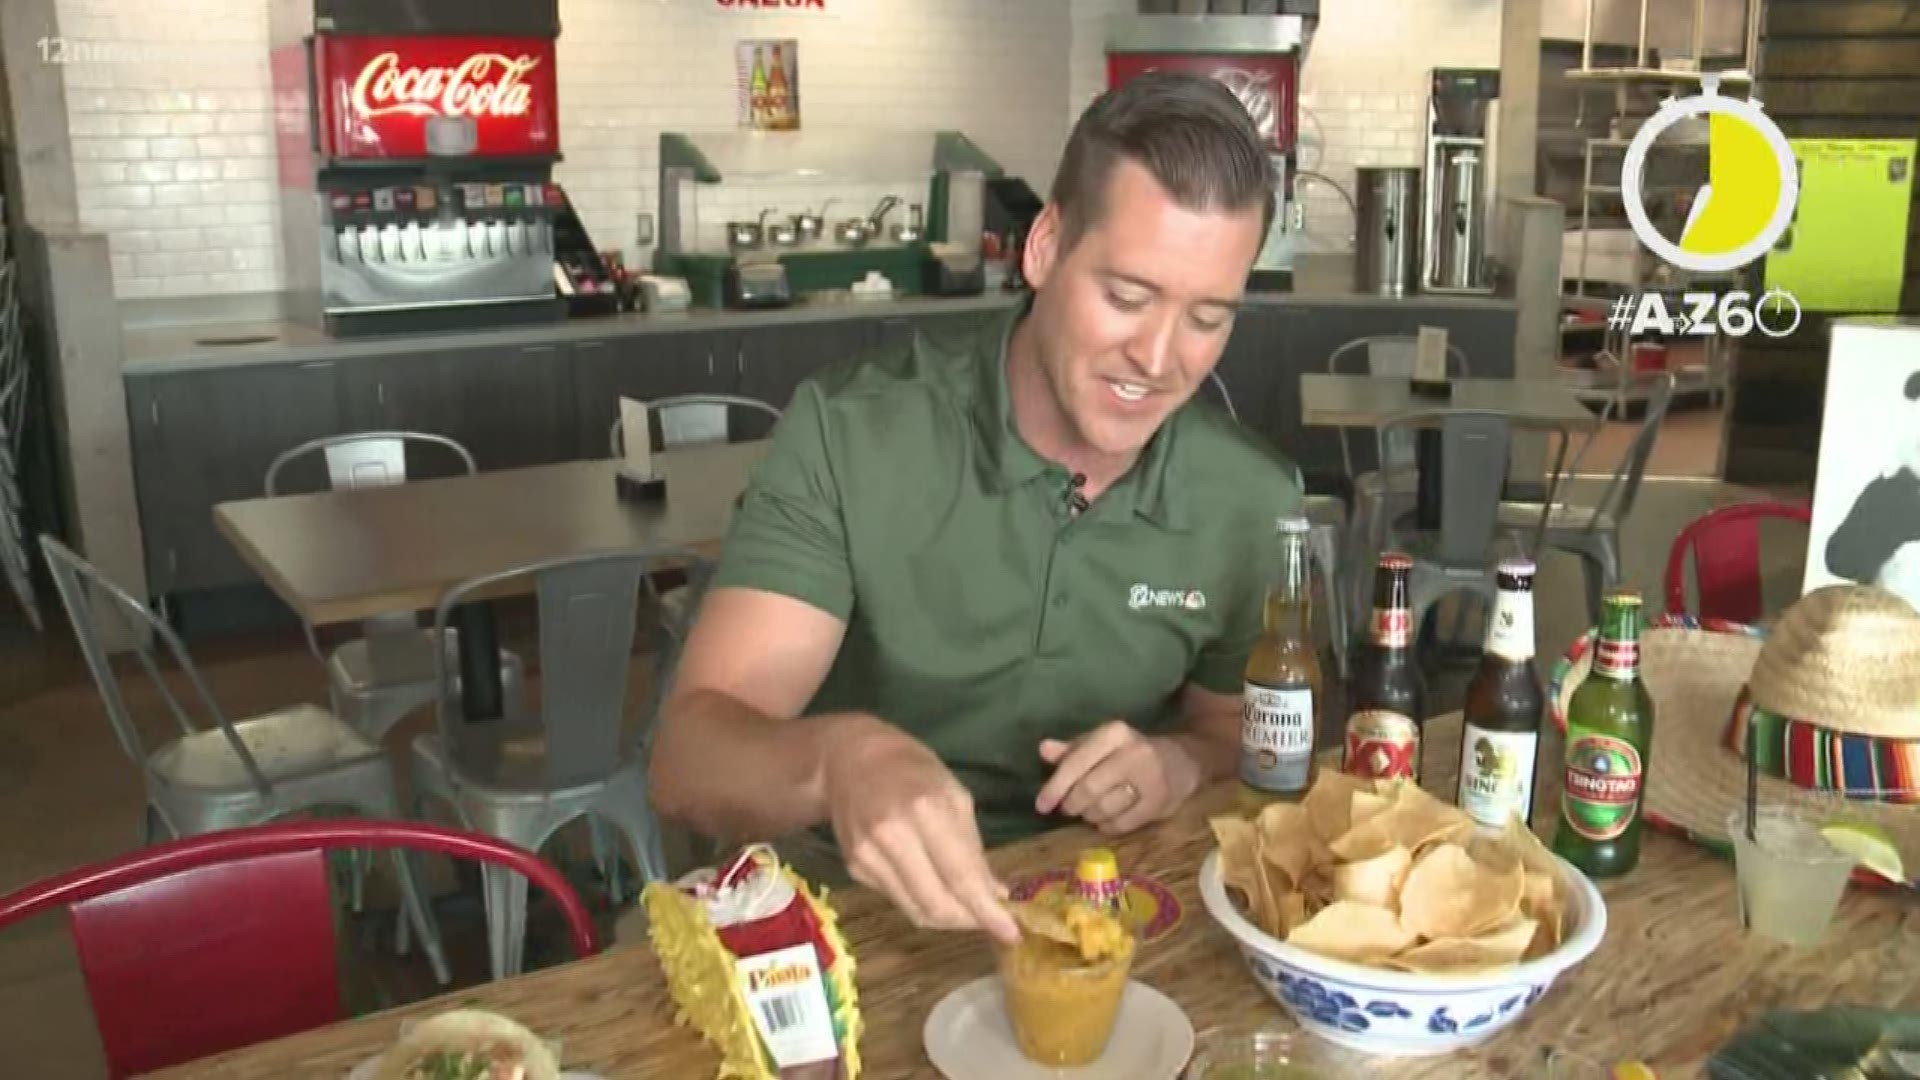 Mitch Carr is previewing the Rockin' Taco Street Festival in downtown Chandler on Sept. 13. See how he handles the tacos from one of the event vendors.